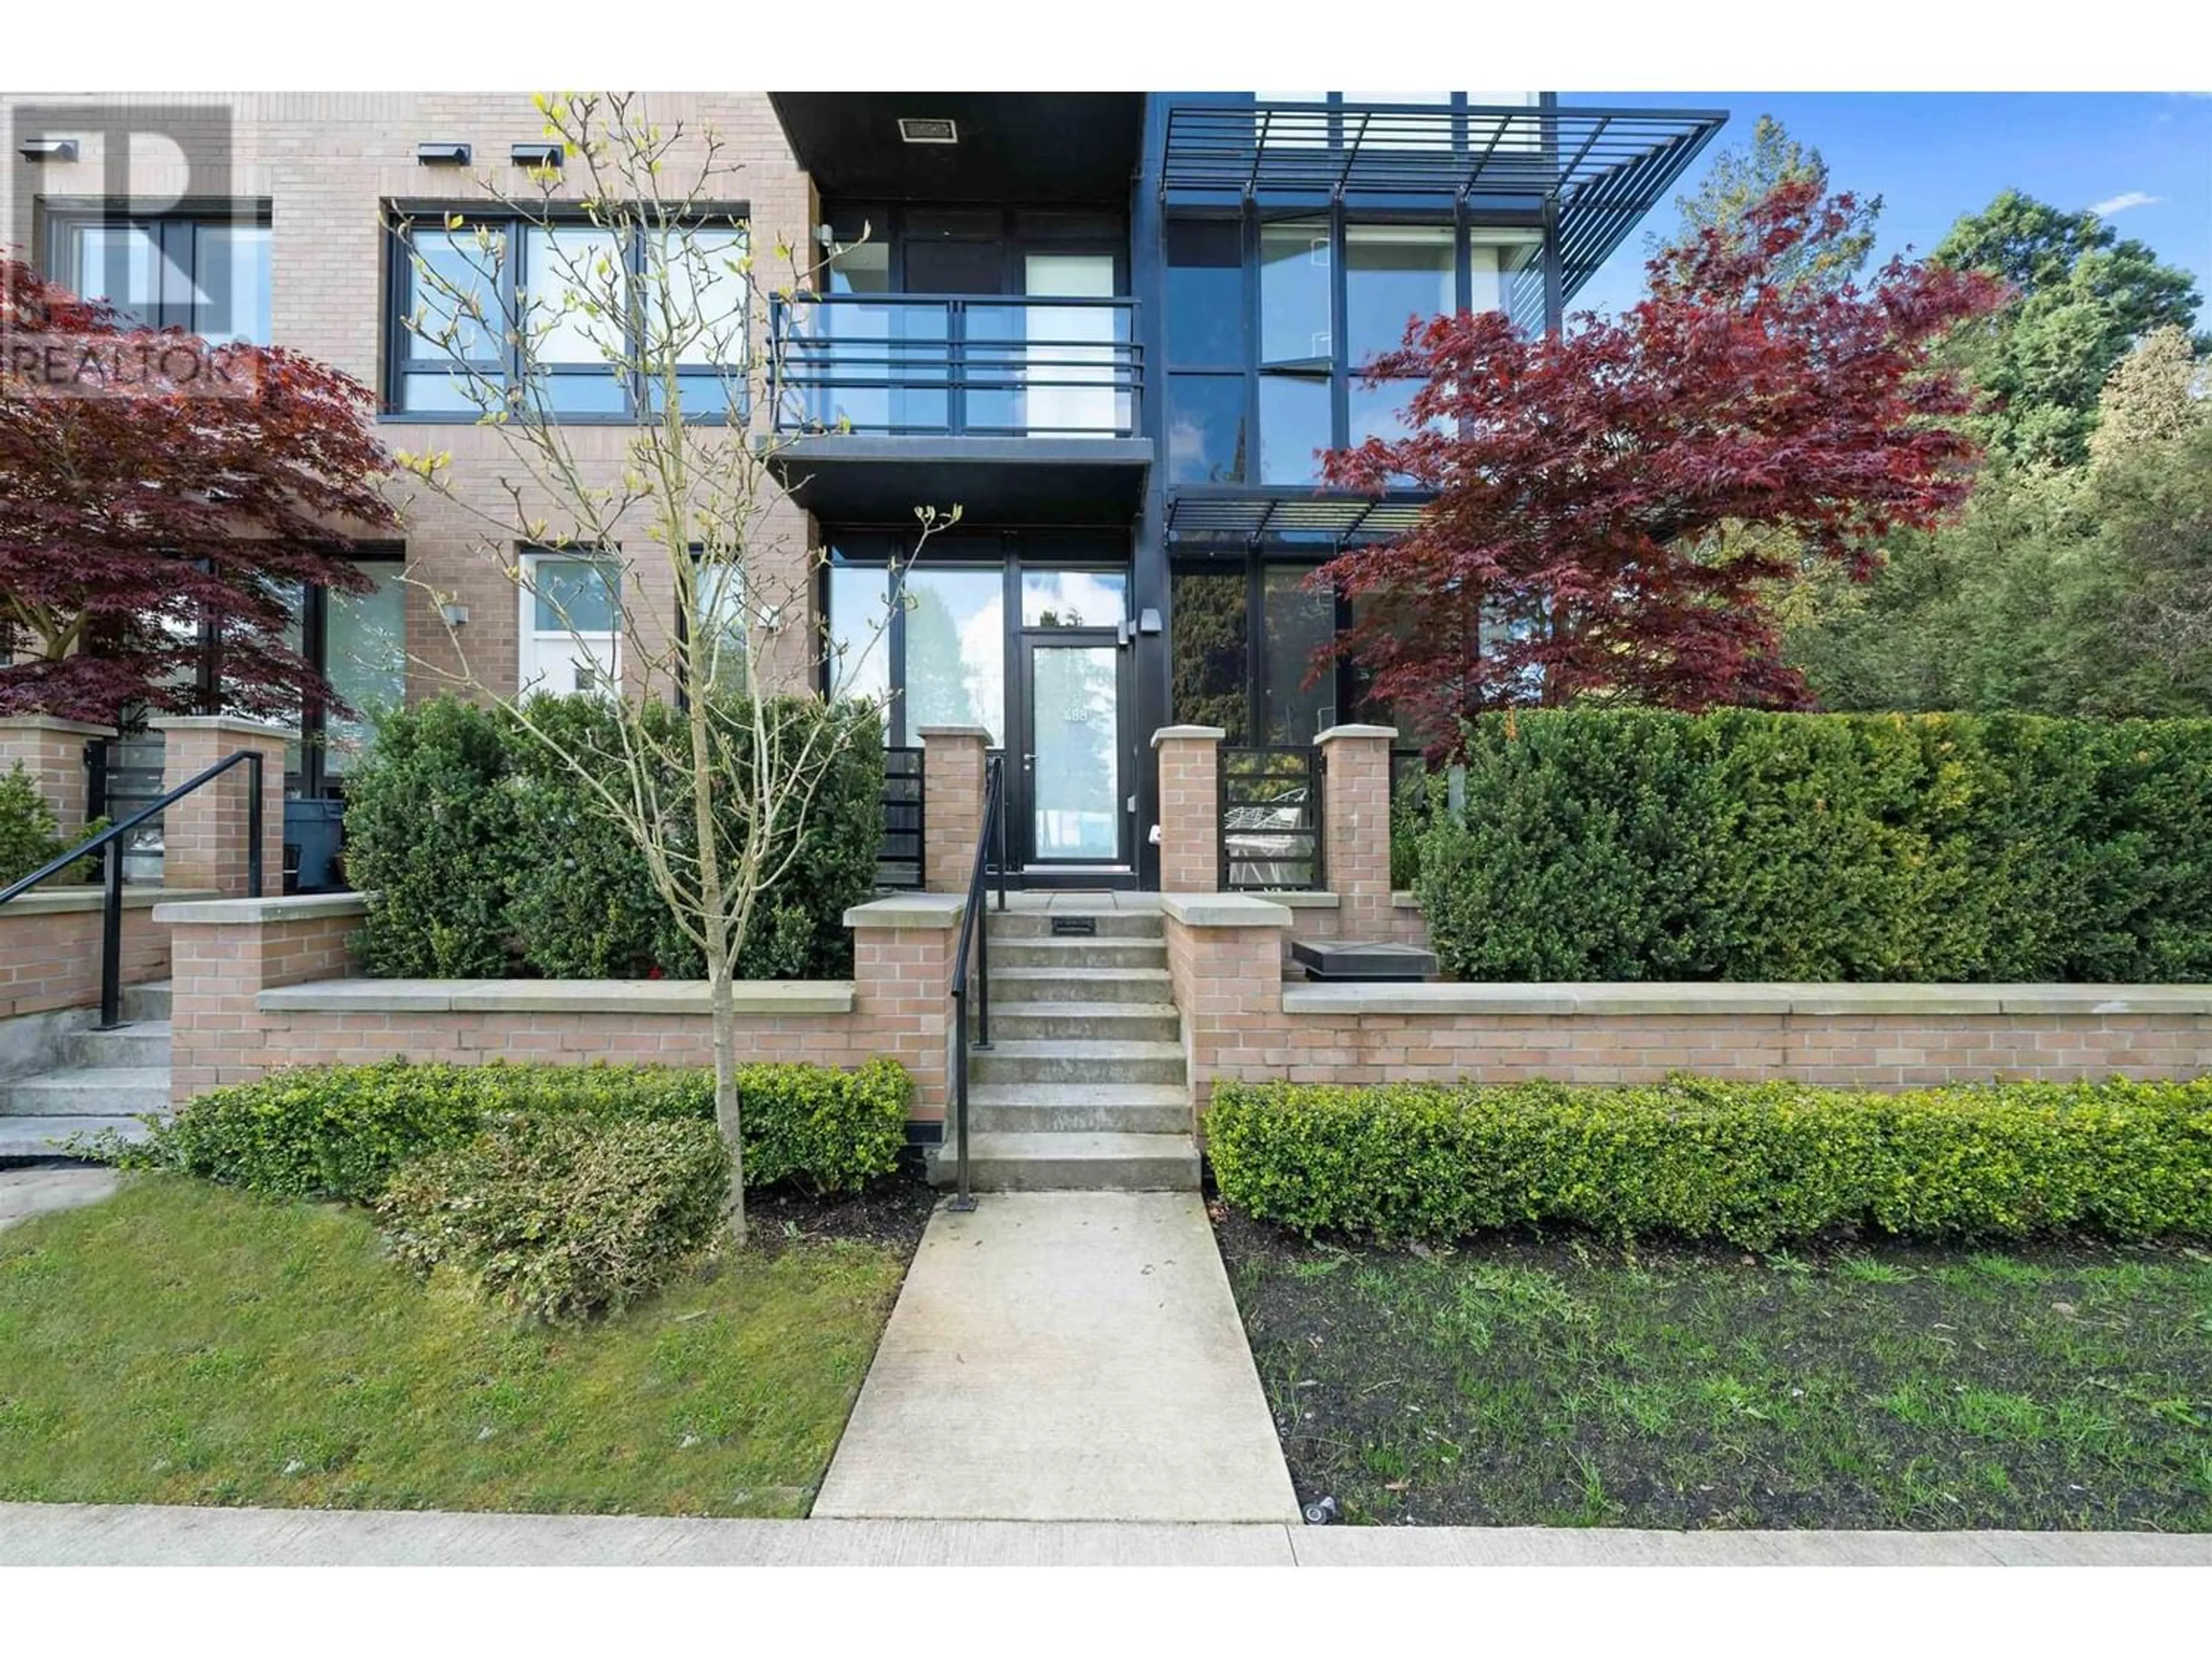 Home with brick exterior material for 488 W 28TH AVENUE, Vancouver British Columbia V5Y0M2